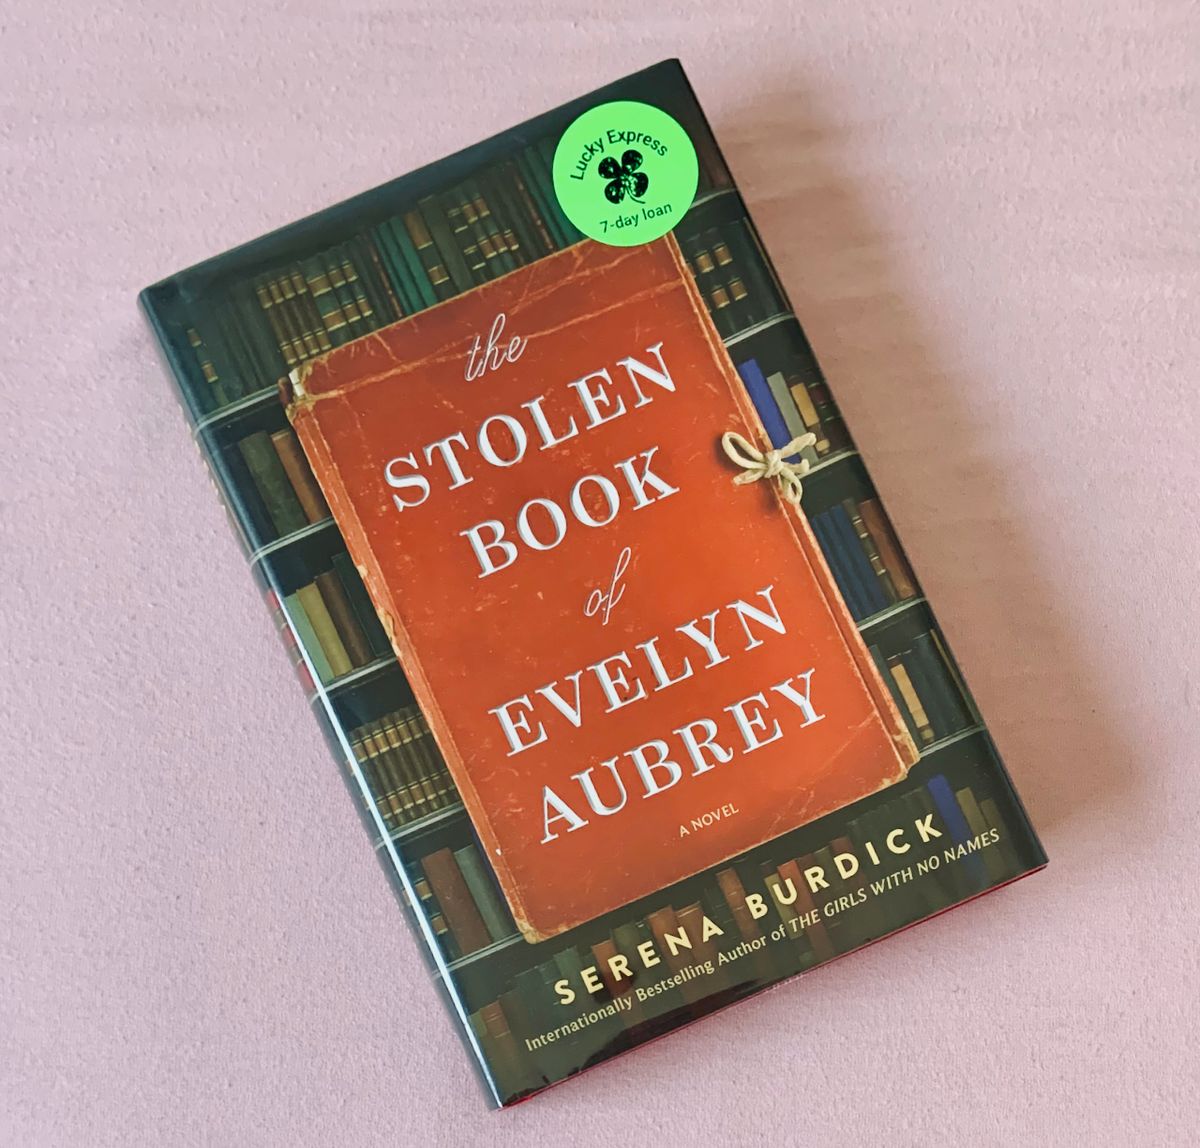 books you may love: The Stolen Book of Evelyn Aubrey by Serena Burdick